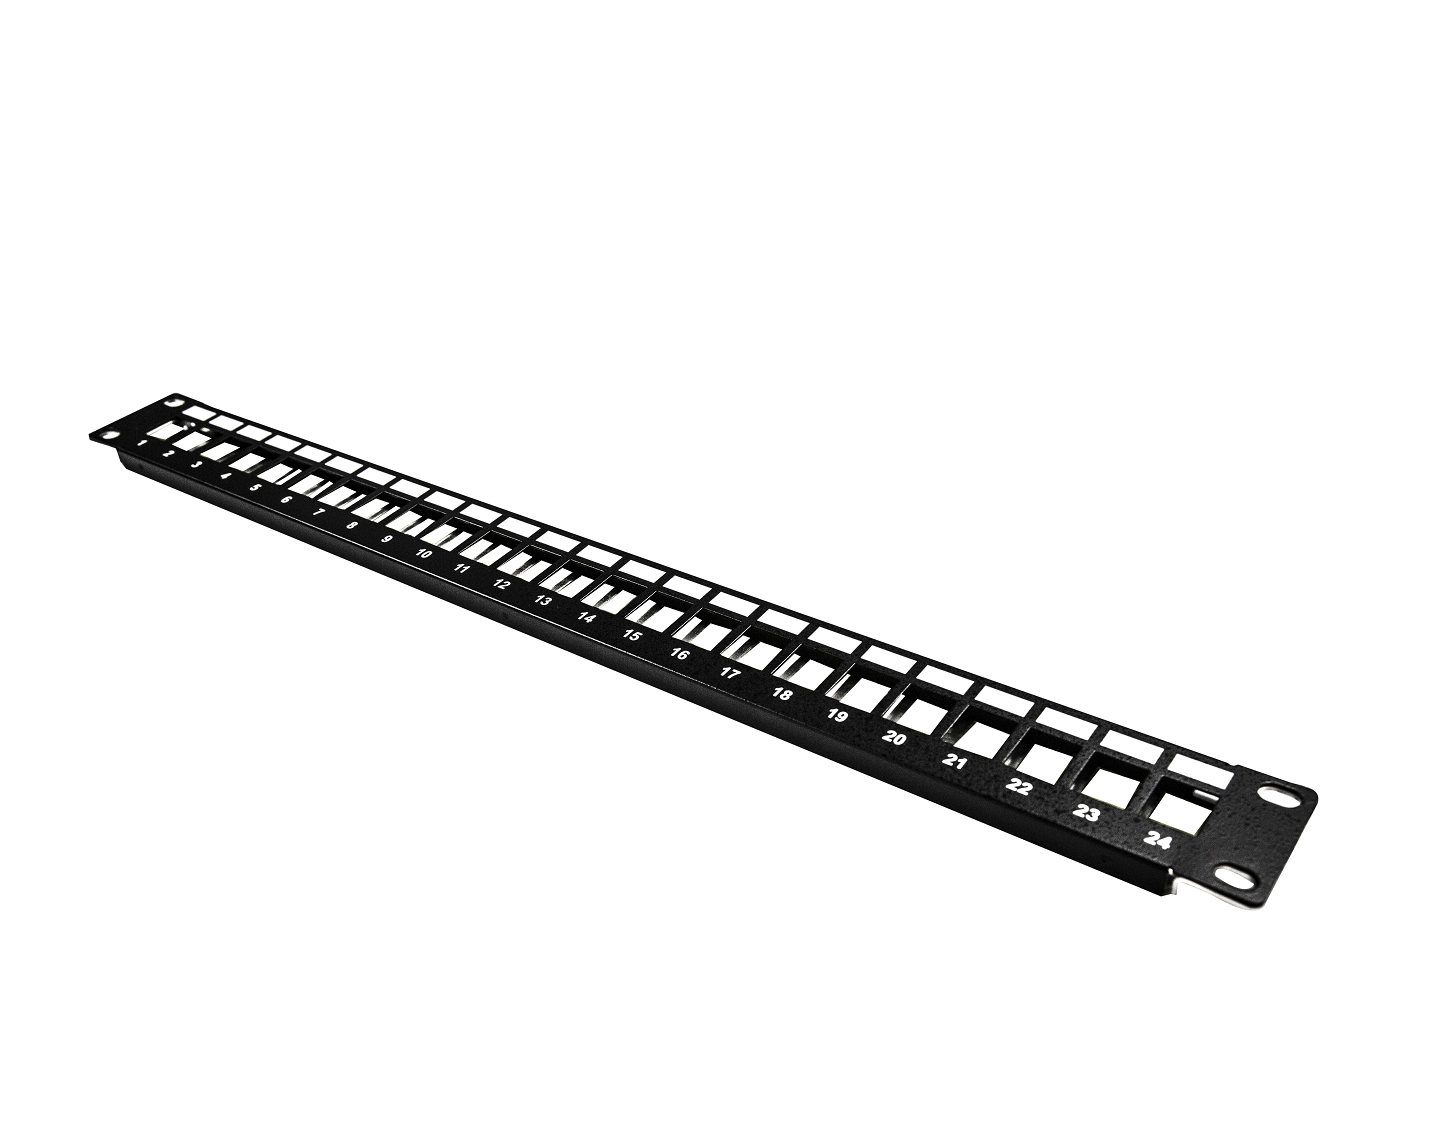 CAT6A Shielded Patch Panel Illustration